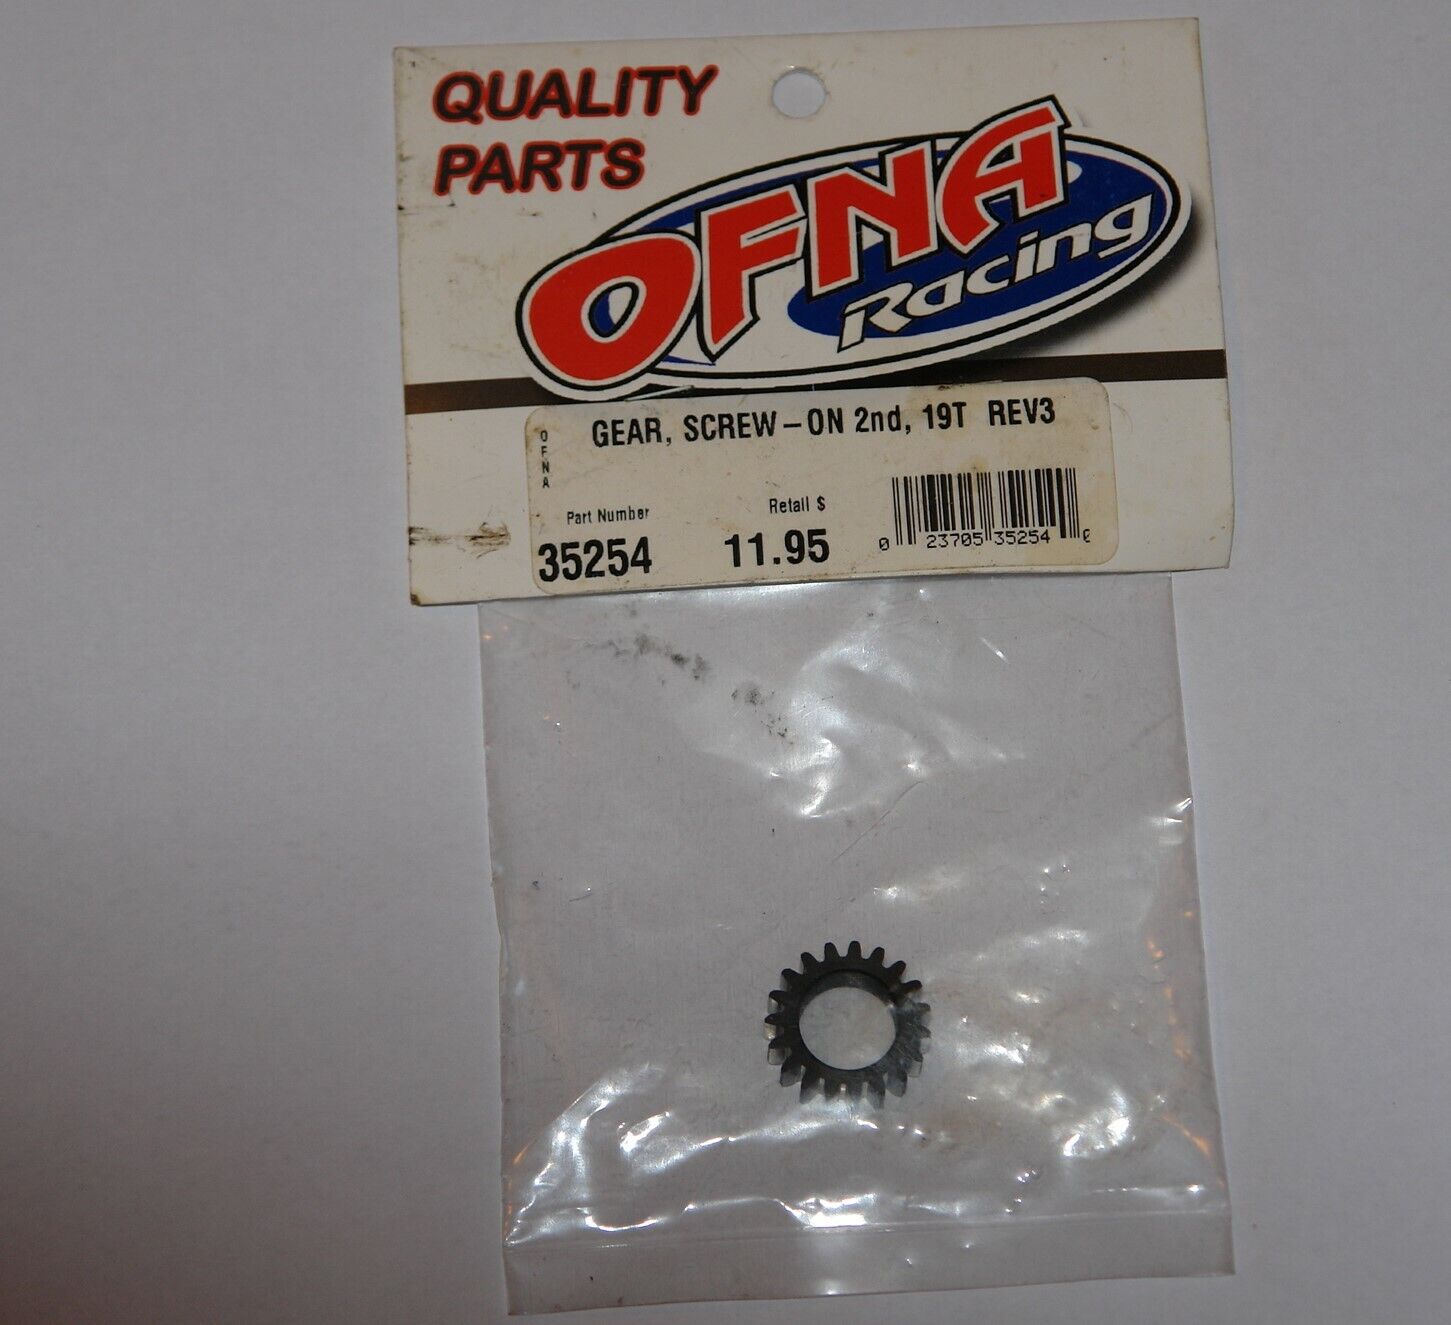 OFNA 35254, Gear, Screw-ON 2nd, 19T, REV 3, New Old Stock 